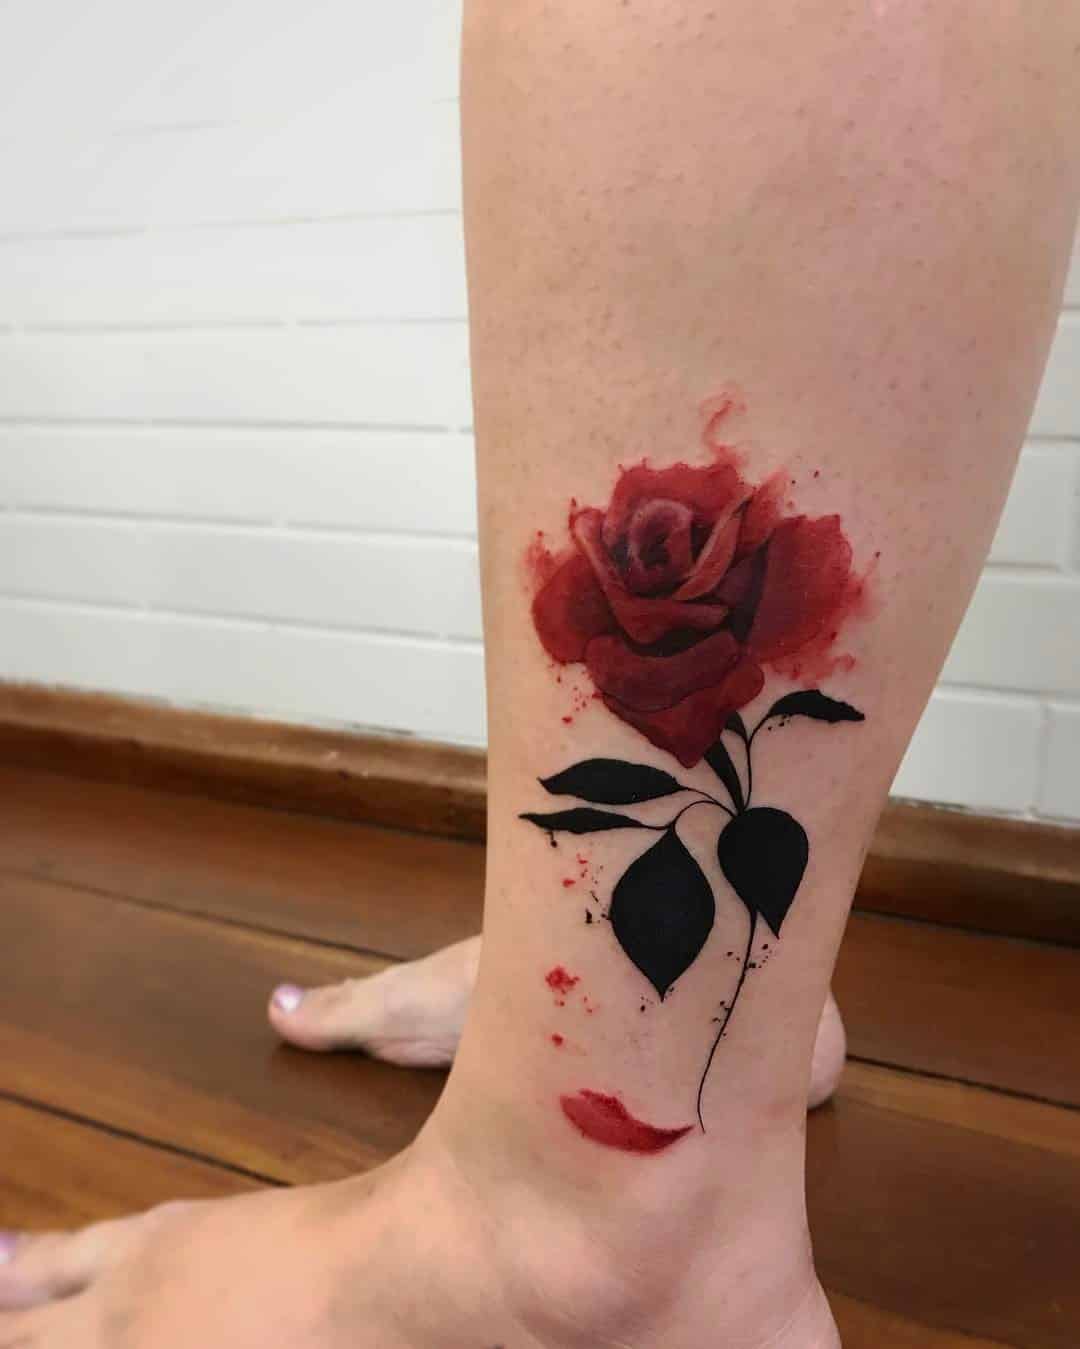 Cute Rose Tattoo Designs / 33 Rose Tattoos And Their Origin, Symbolism, And Meanings ... - While depicting love, the rose is often.